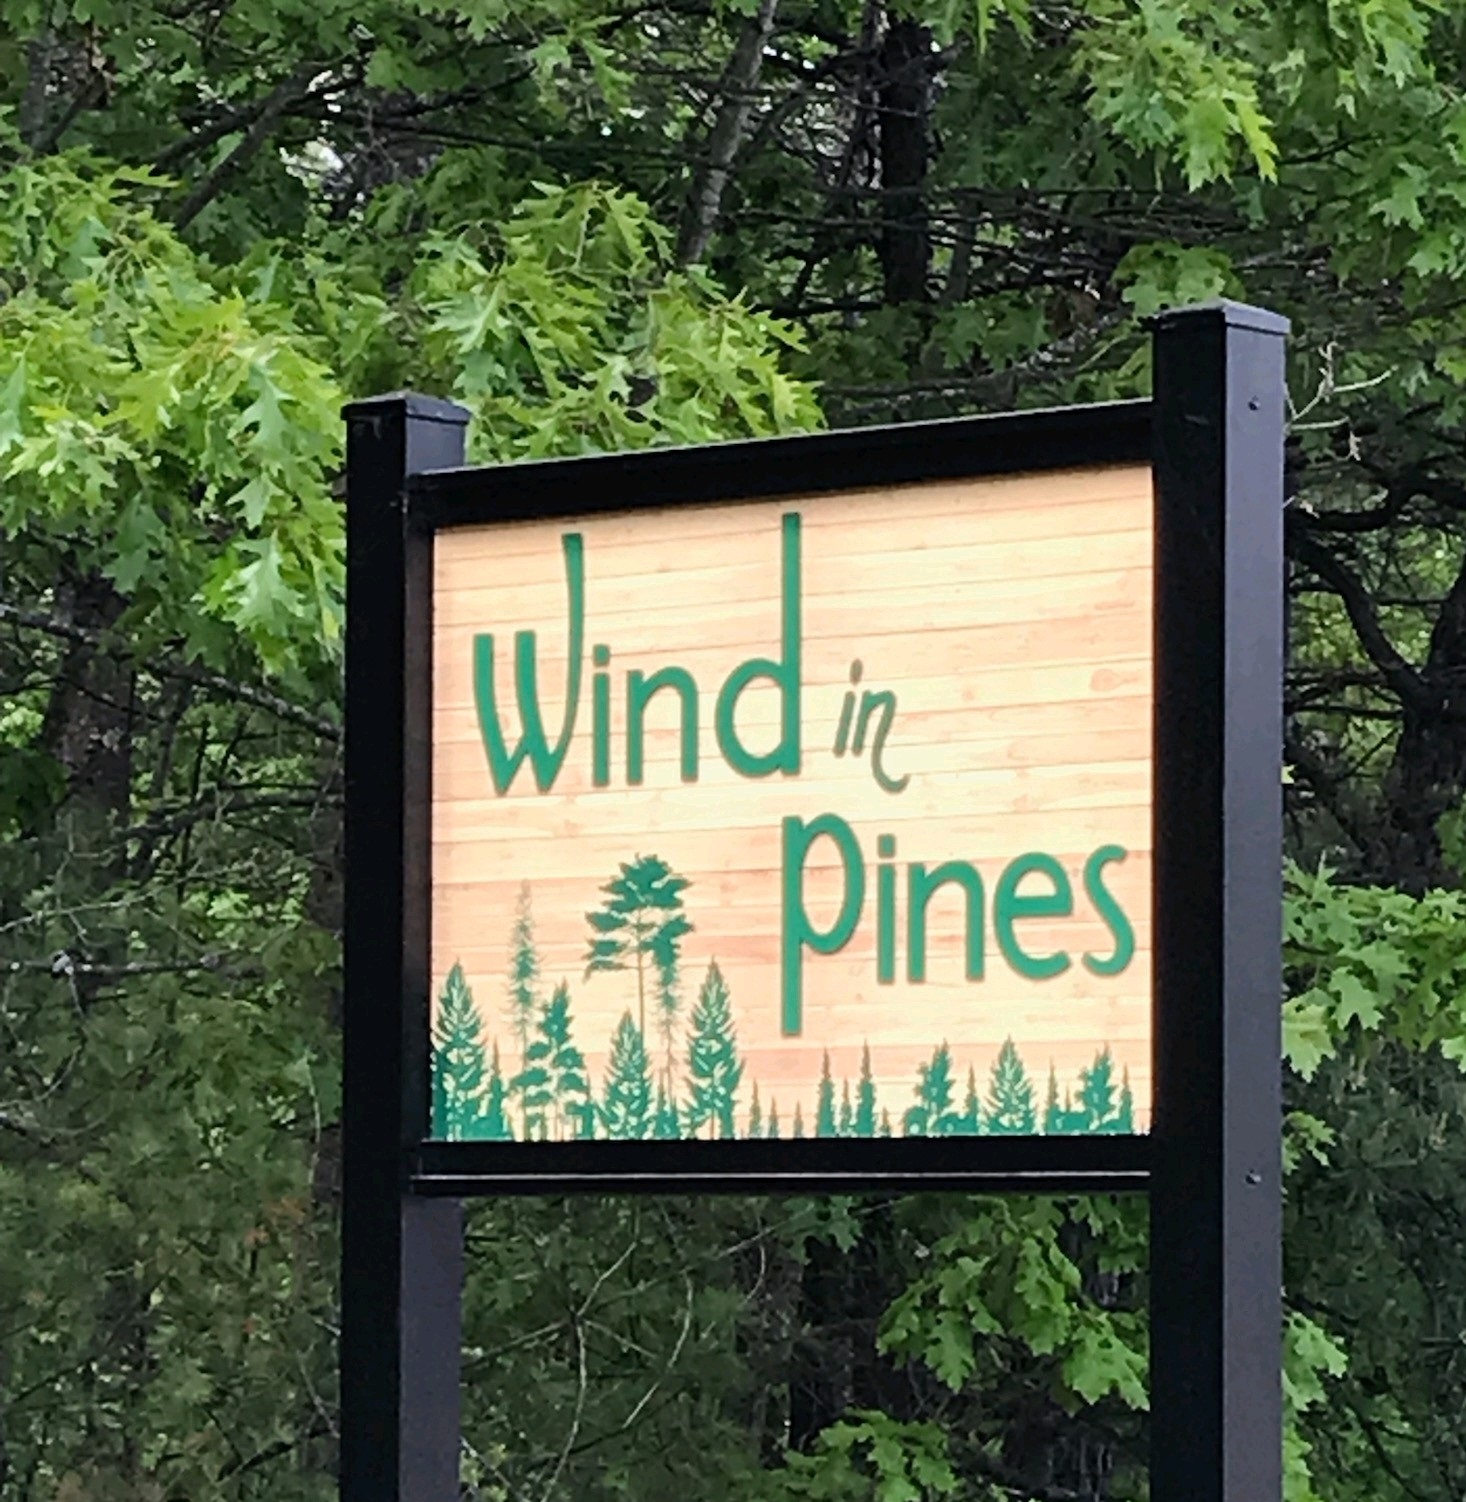 Wind in Pines